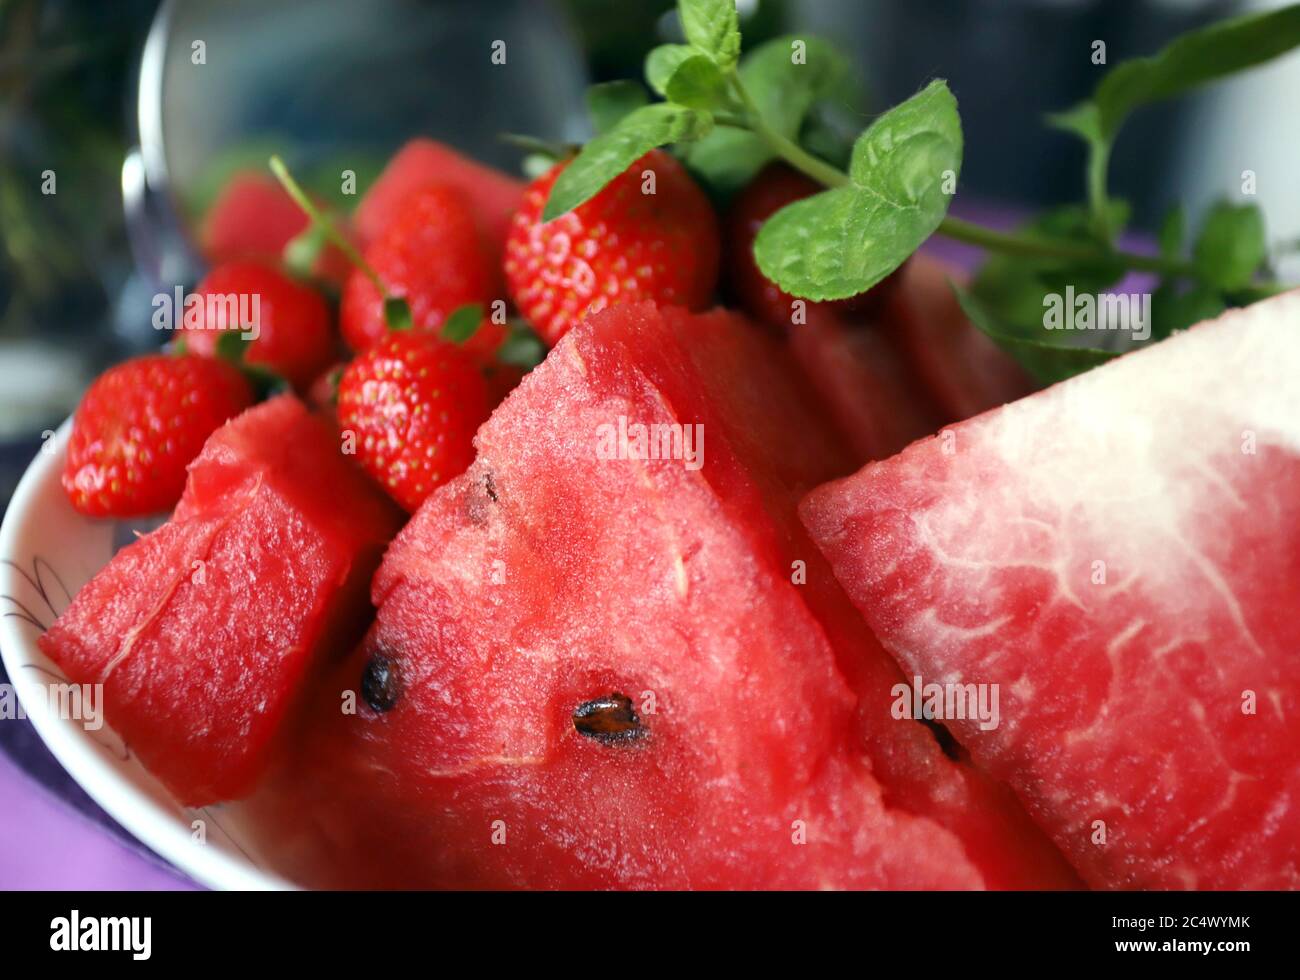 Watermelon, strawberries and mint for healthy eating. Red fruits for detox. Stock Photo